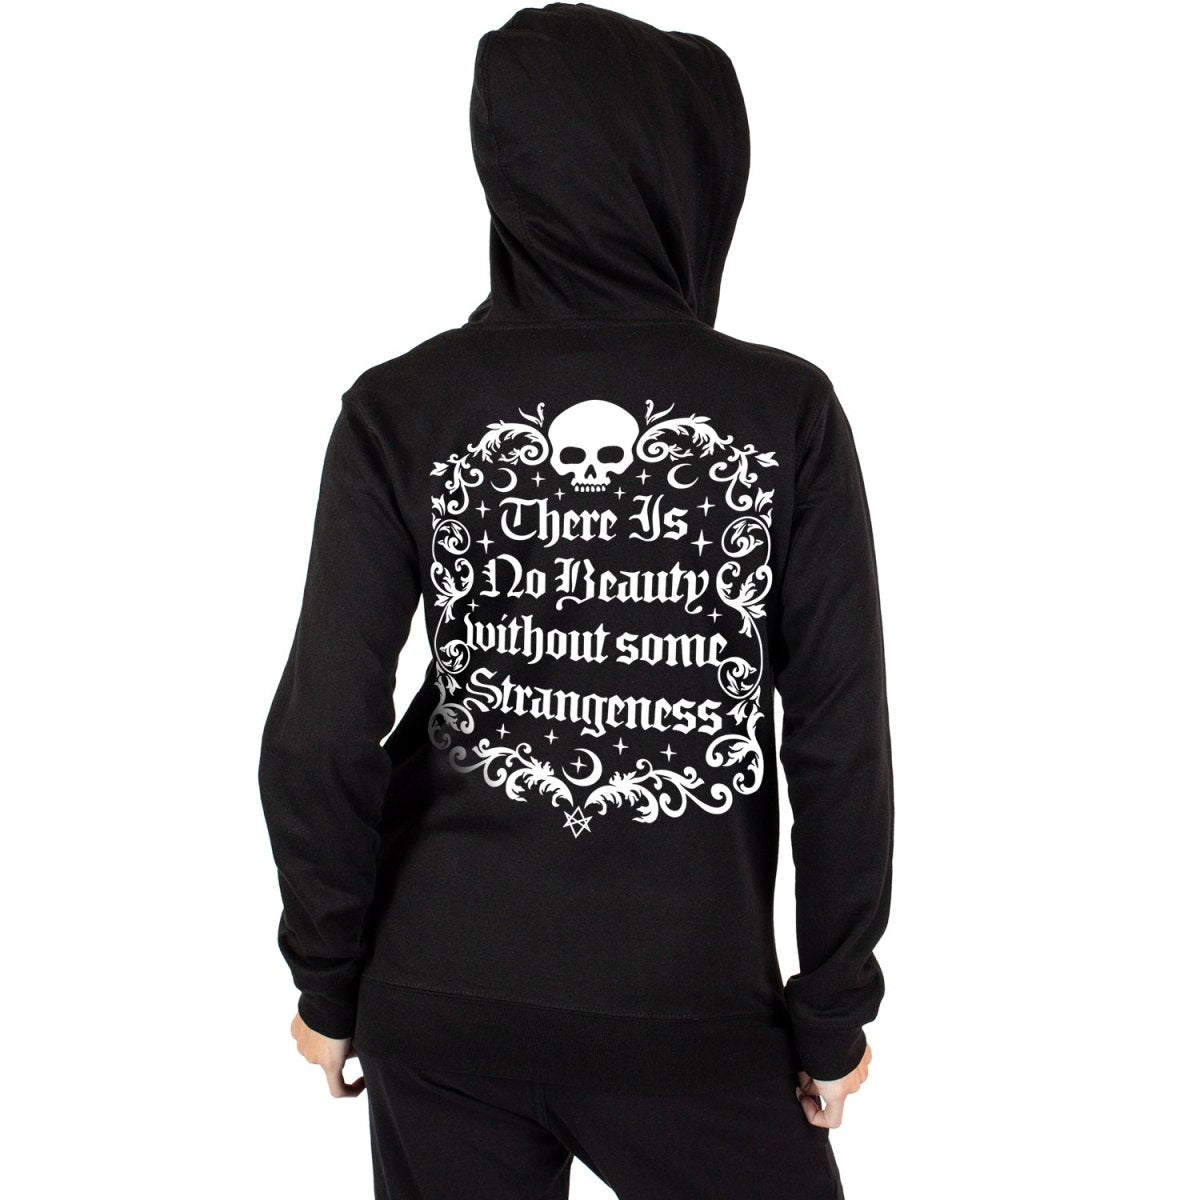 Too Fast | No Beauty Without Strangeness Zip Up Hoodie Hooded Sweatshirt